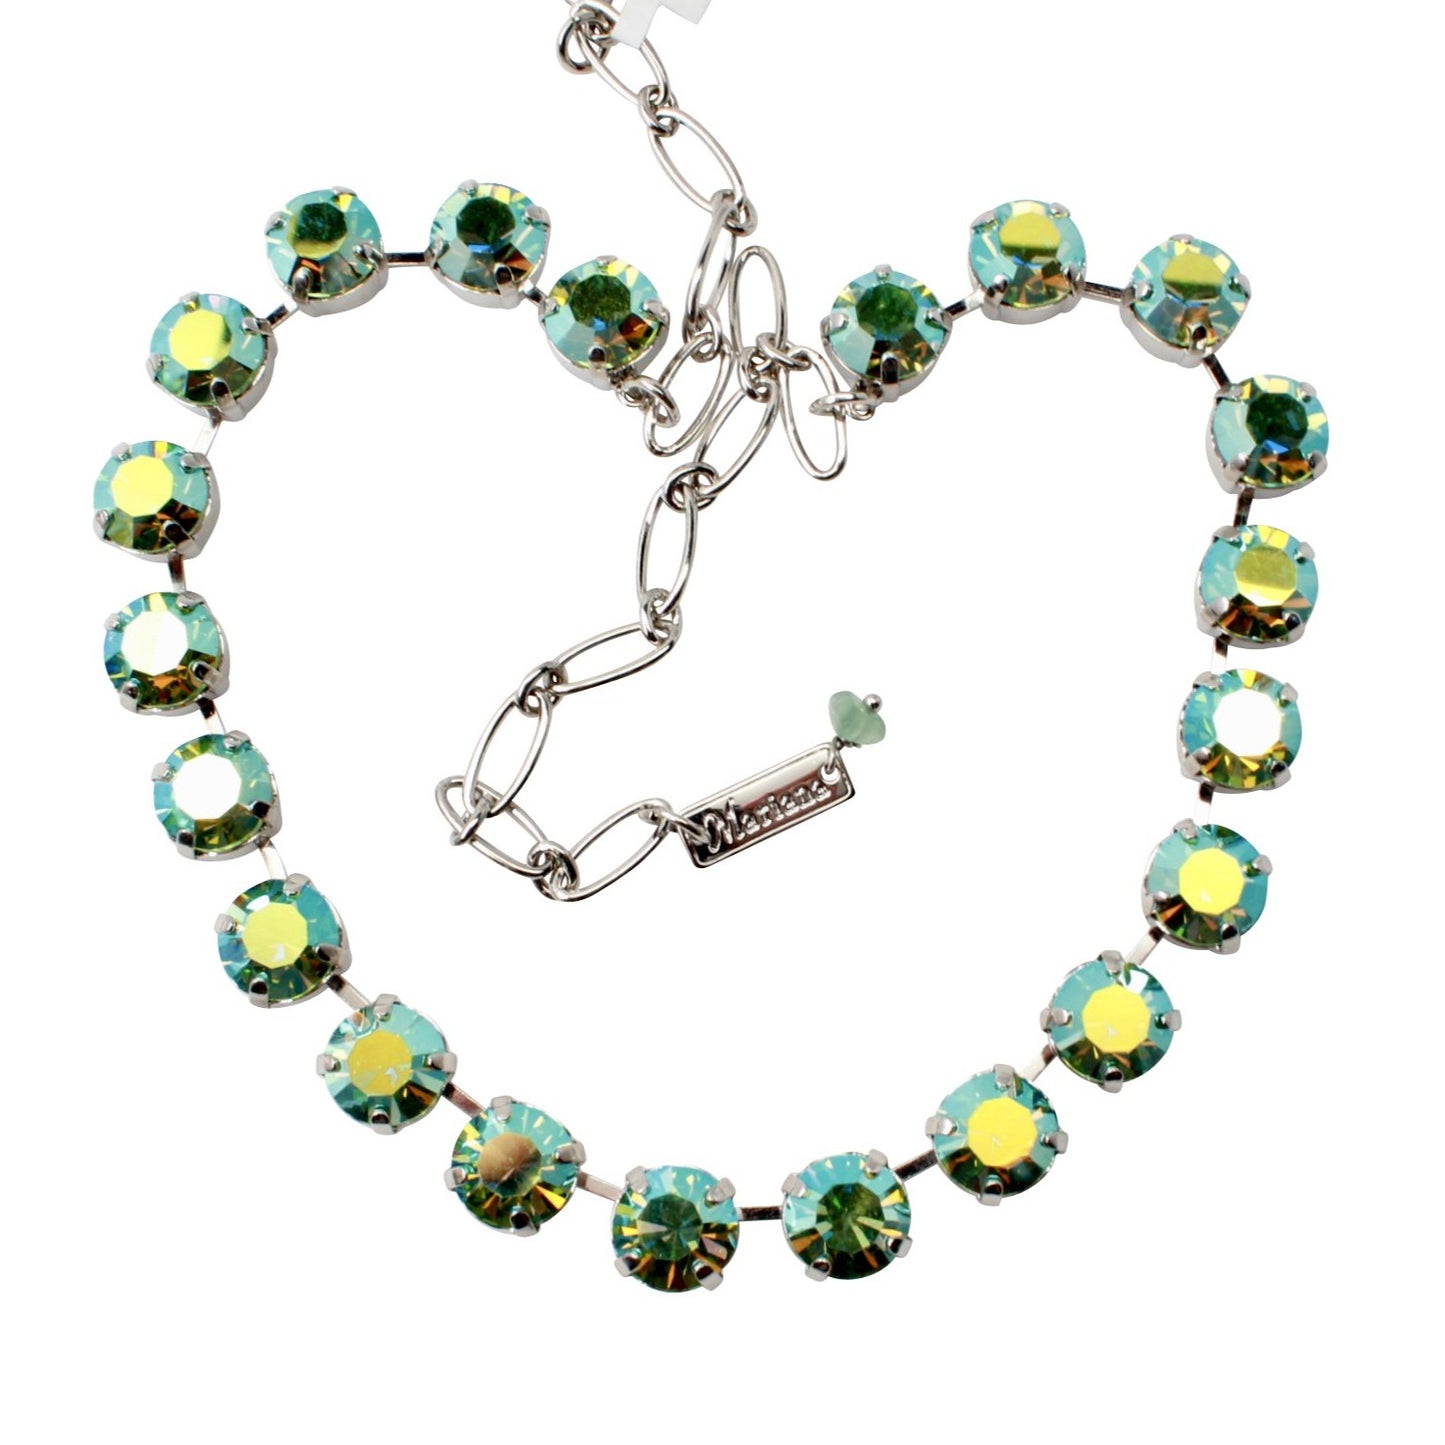 Peridot AB Lovable 11MM Crystal Necklace - MaryTyke's